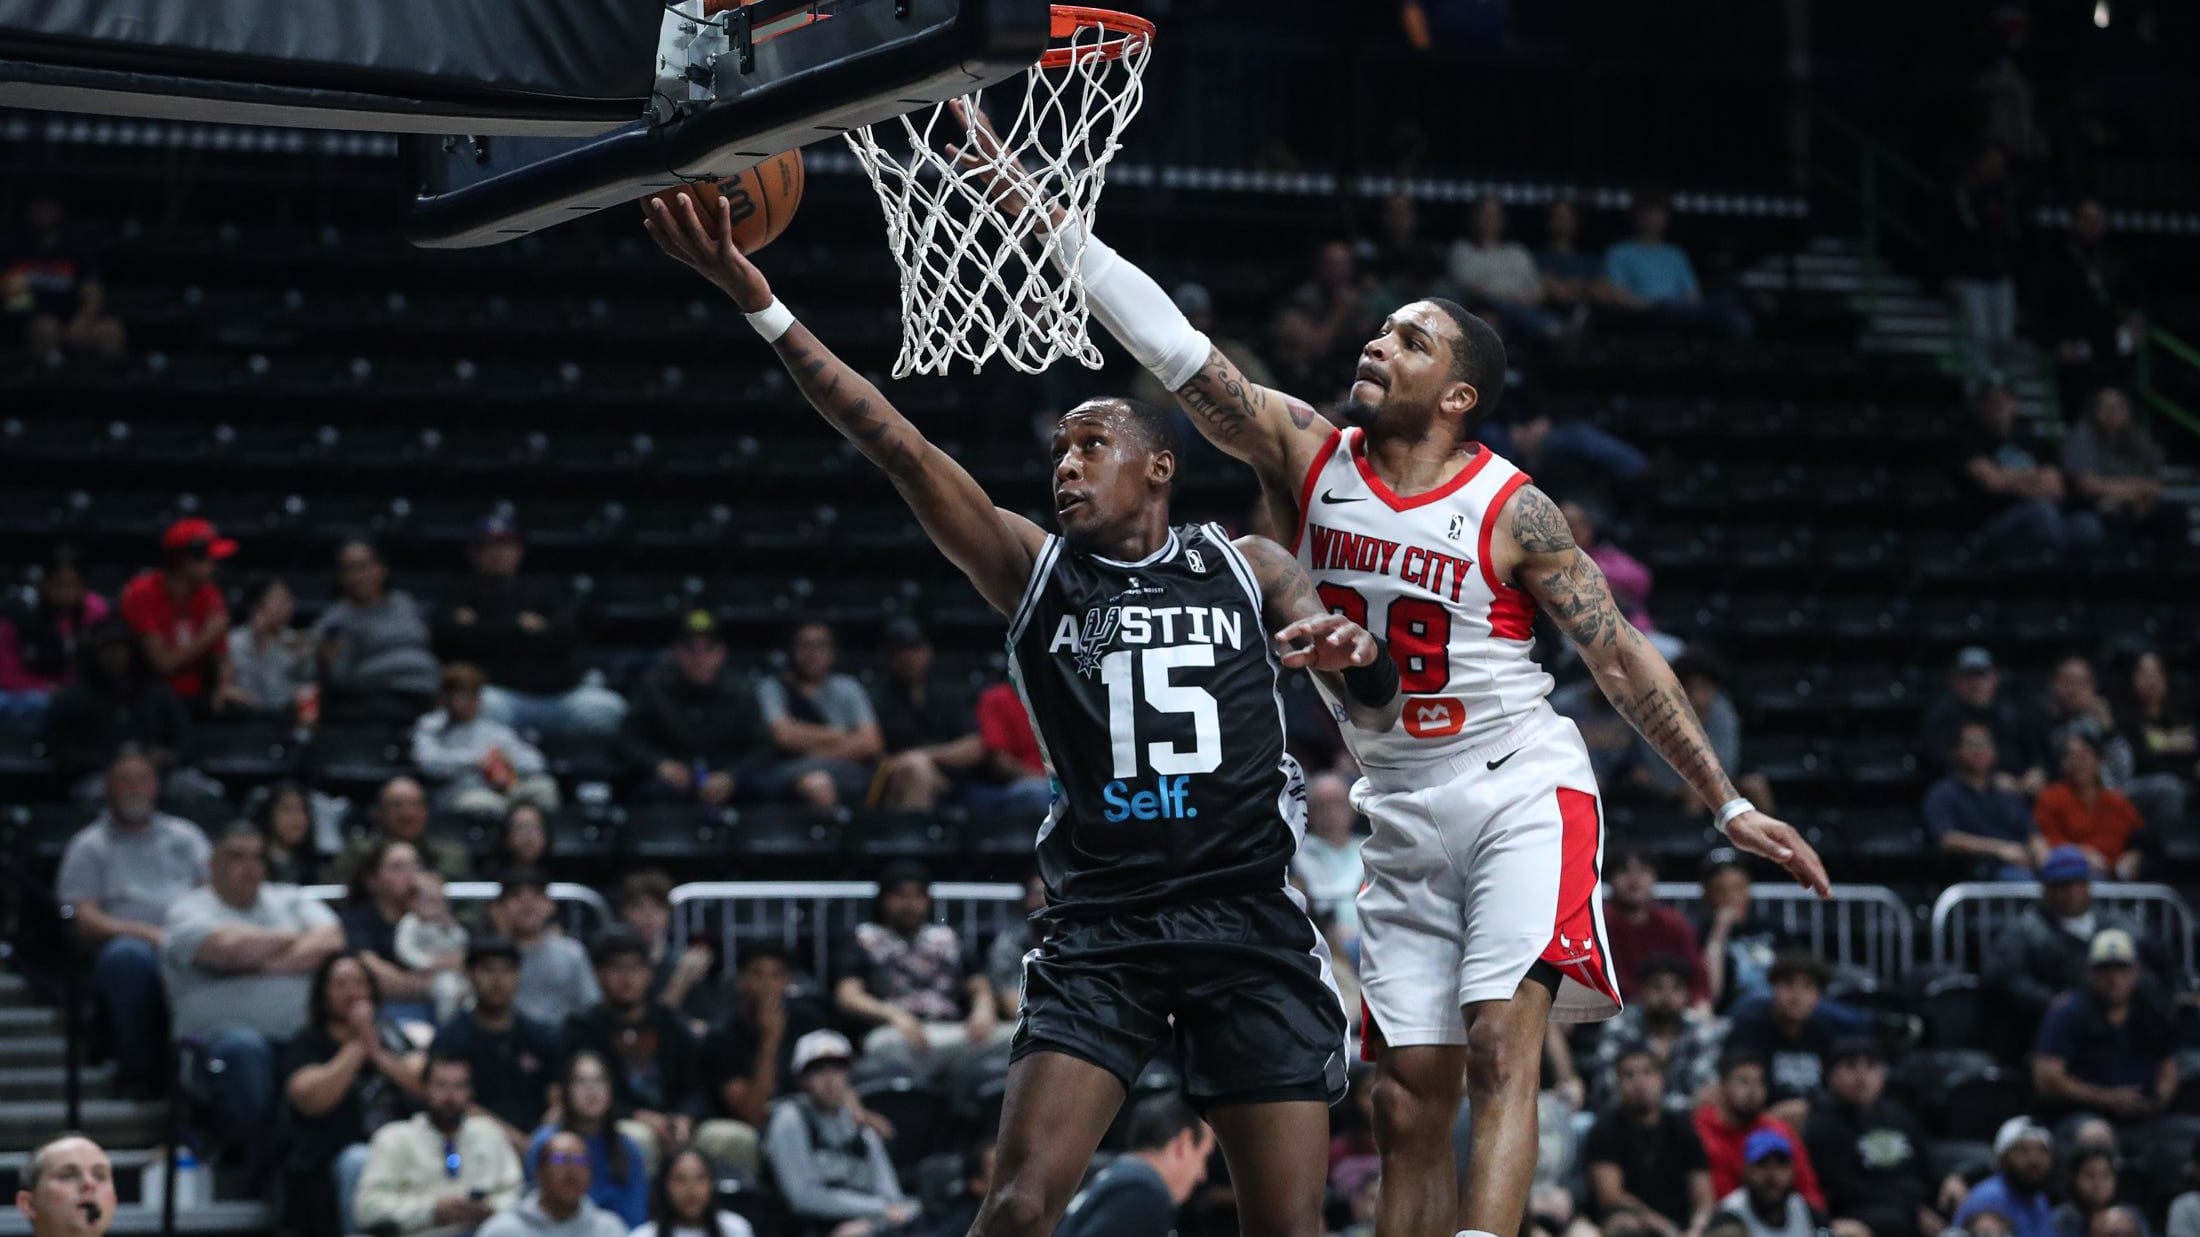 Jamaree Bouyea Season Review: Improving Rise with Austin Spurs